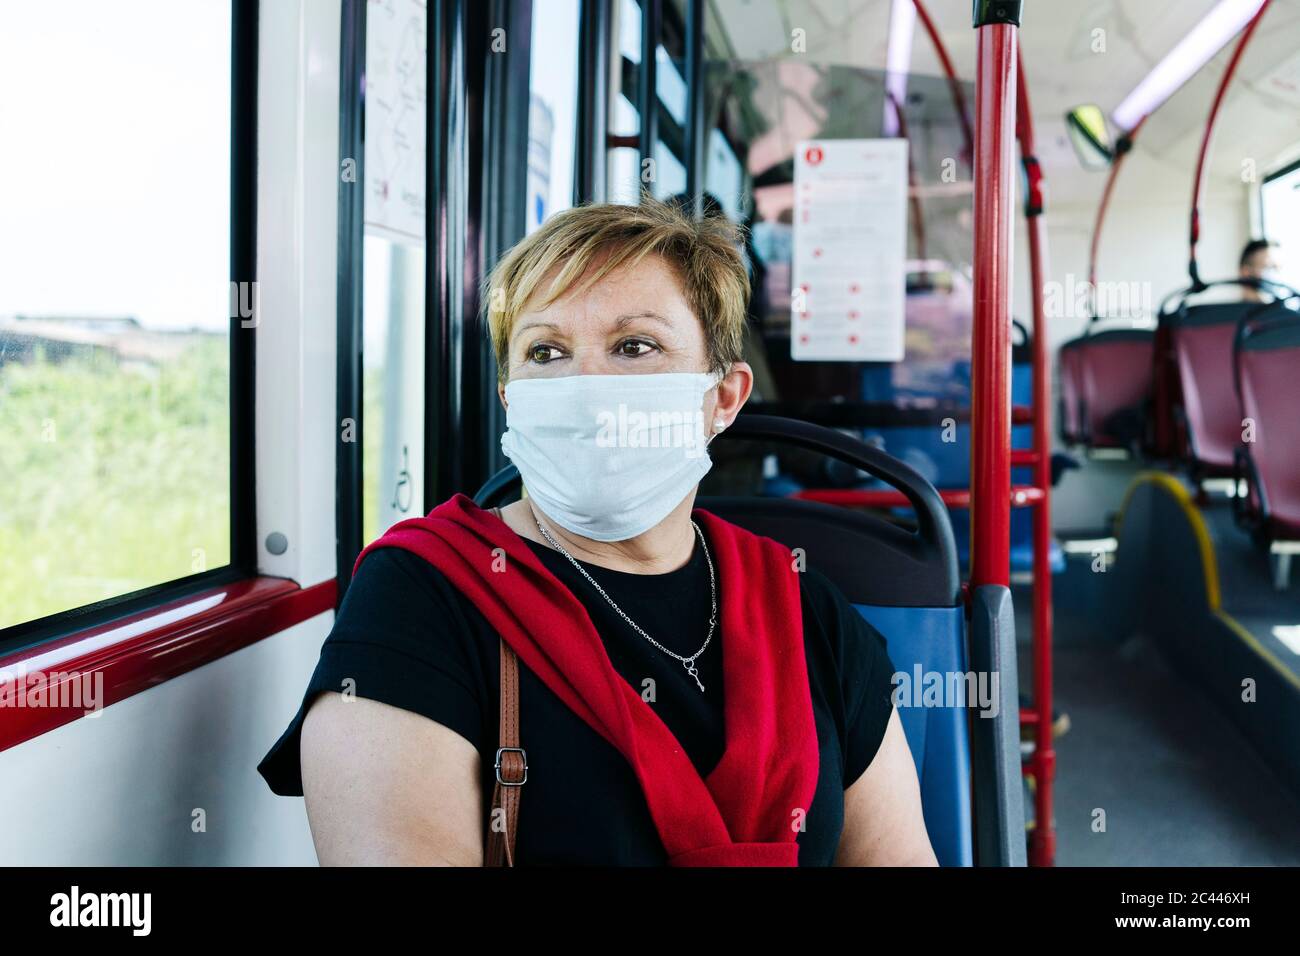 Portrait of mature woman wearing protective mask in public bus looking out of window, Spain Stock Photo